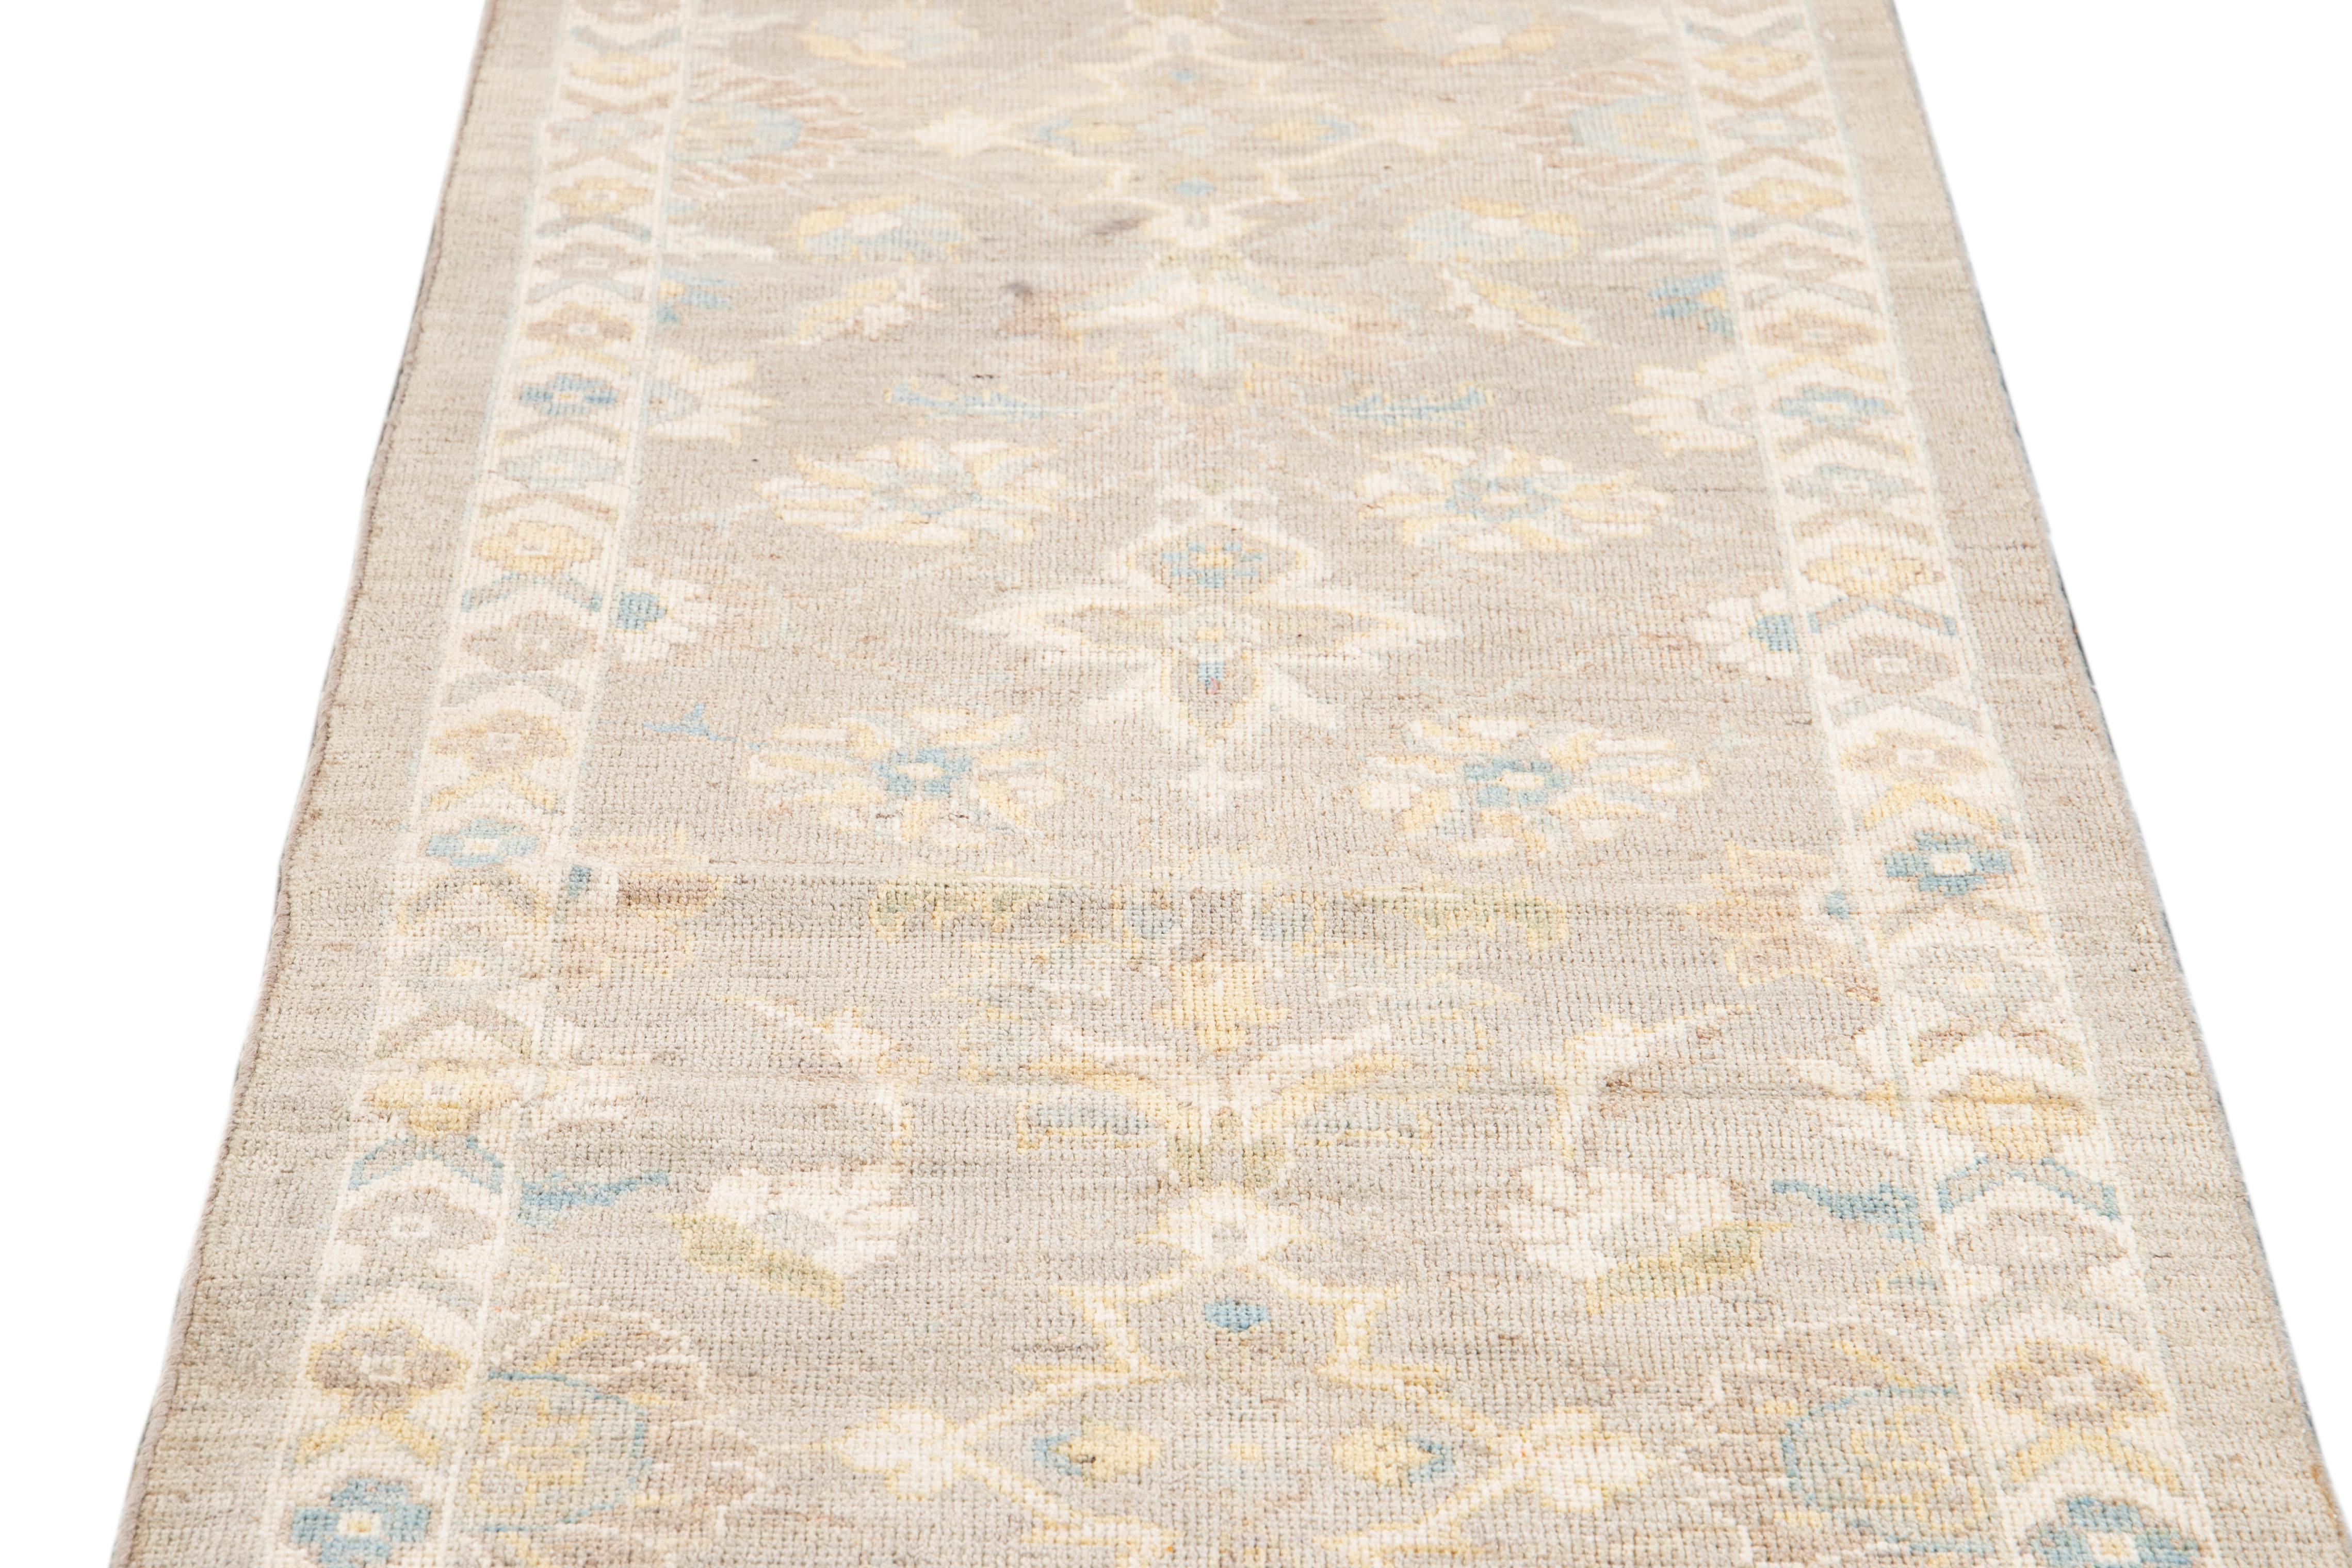 Beautiful contemporary Sultanabad runner rug, hand-knotted wool with a gray and beige field and multi-color accents all-over floral design.

This rug measures 3'01